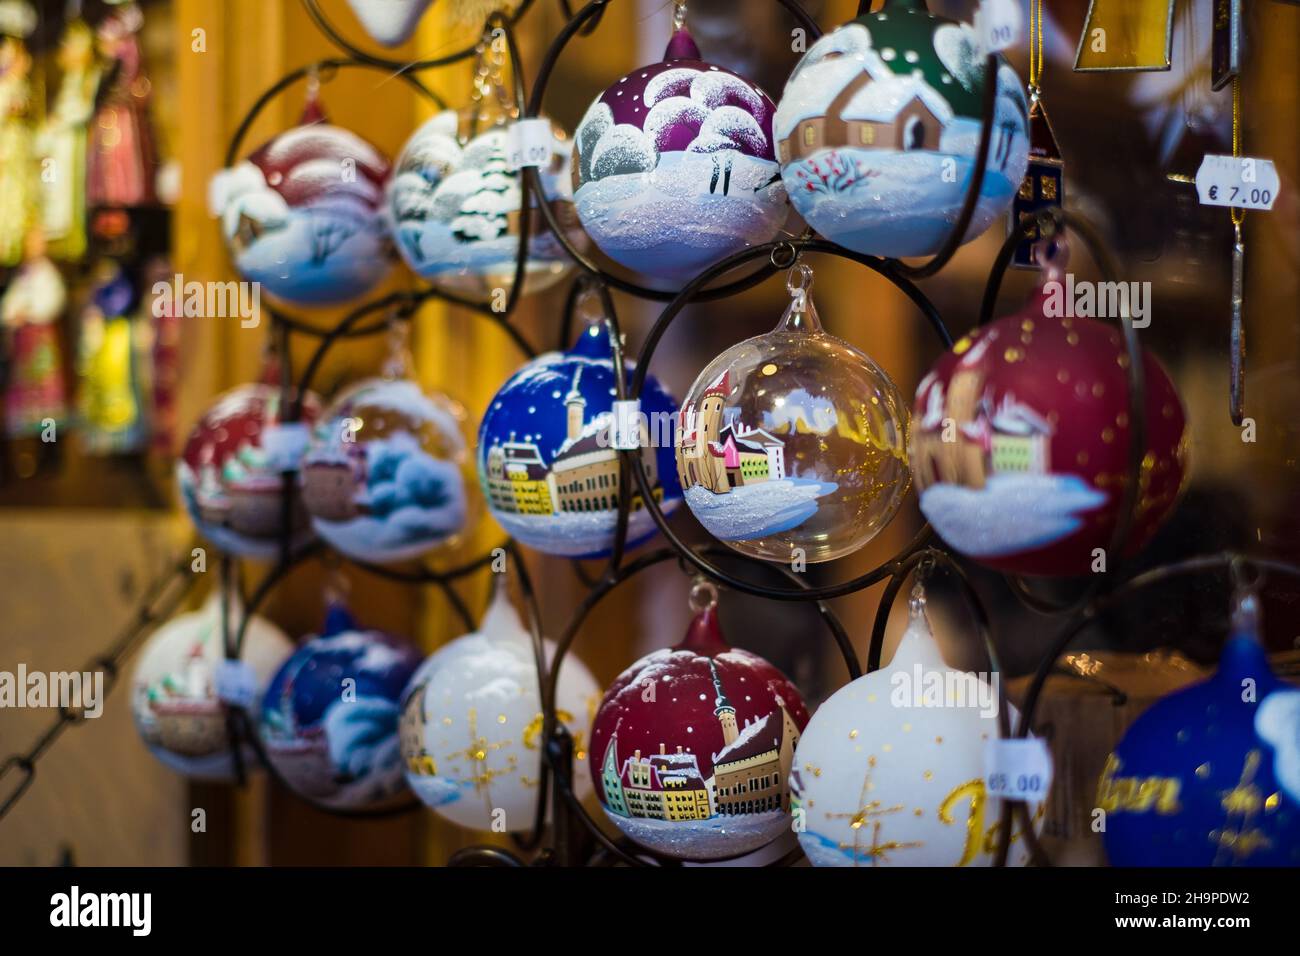 Christmas decoration. Hand painted souvenirs or gifts. Northern Europe holiday traditions. Stock Photo